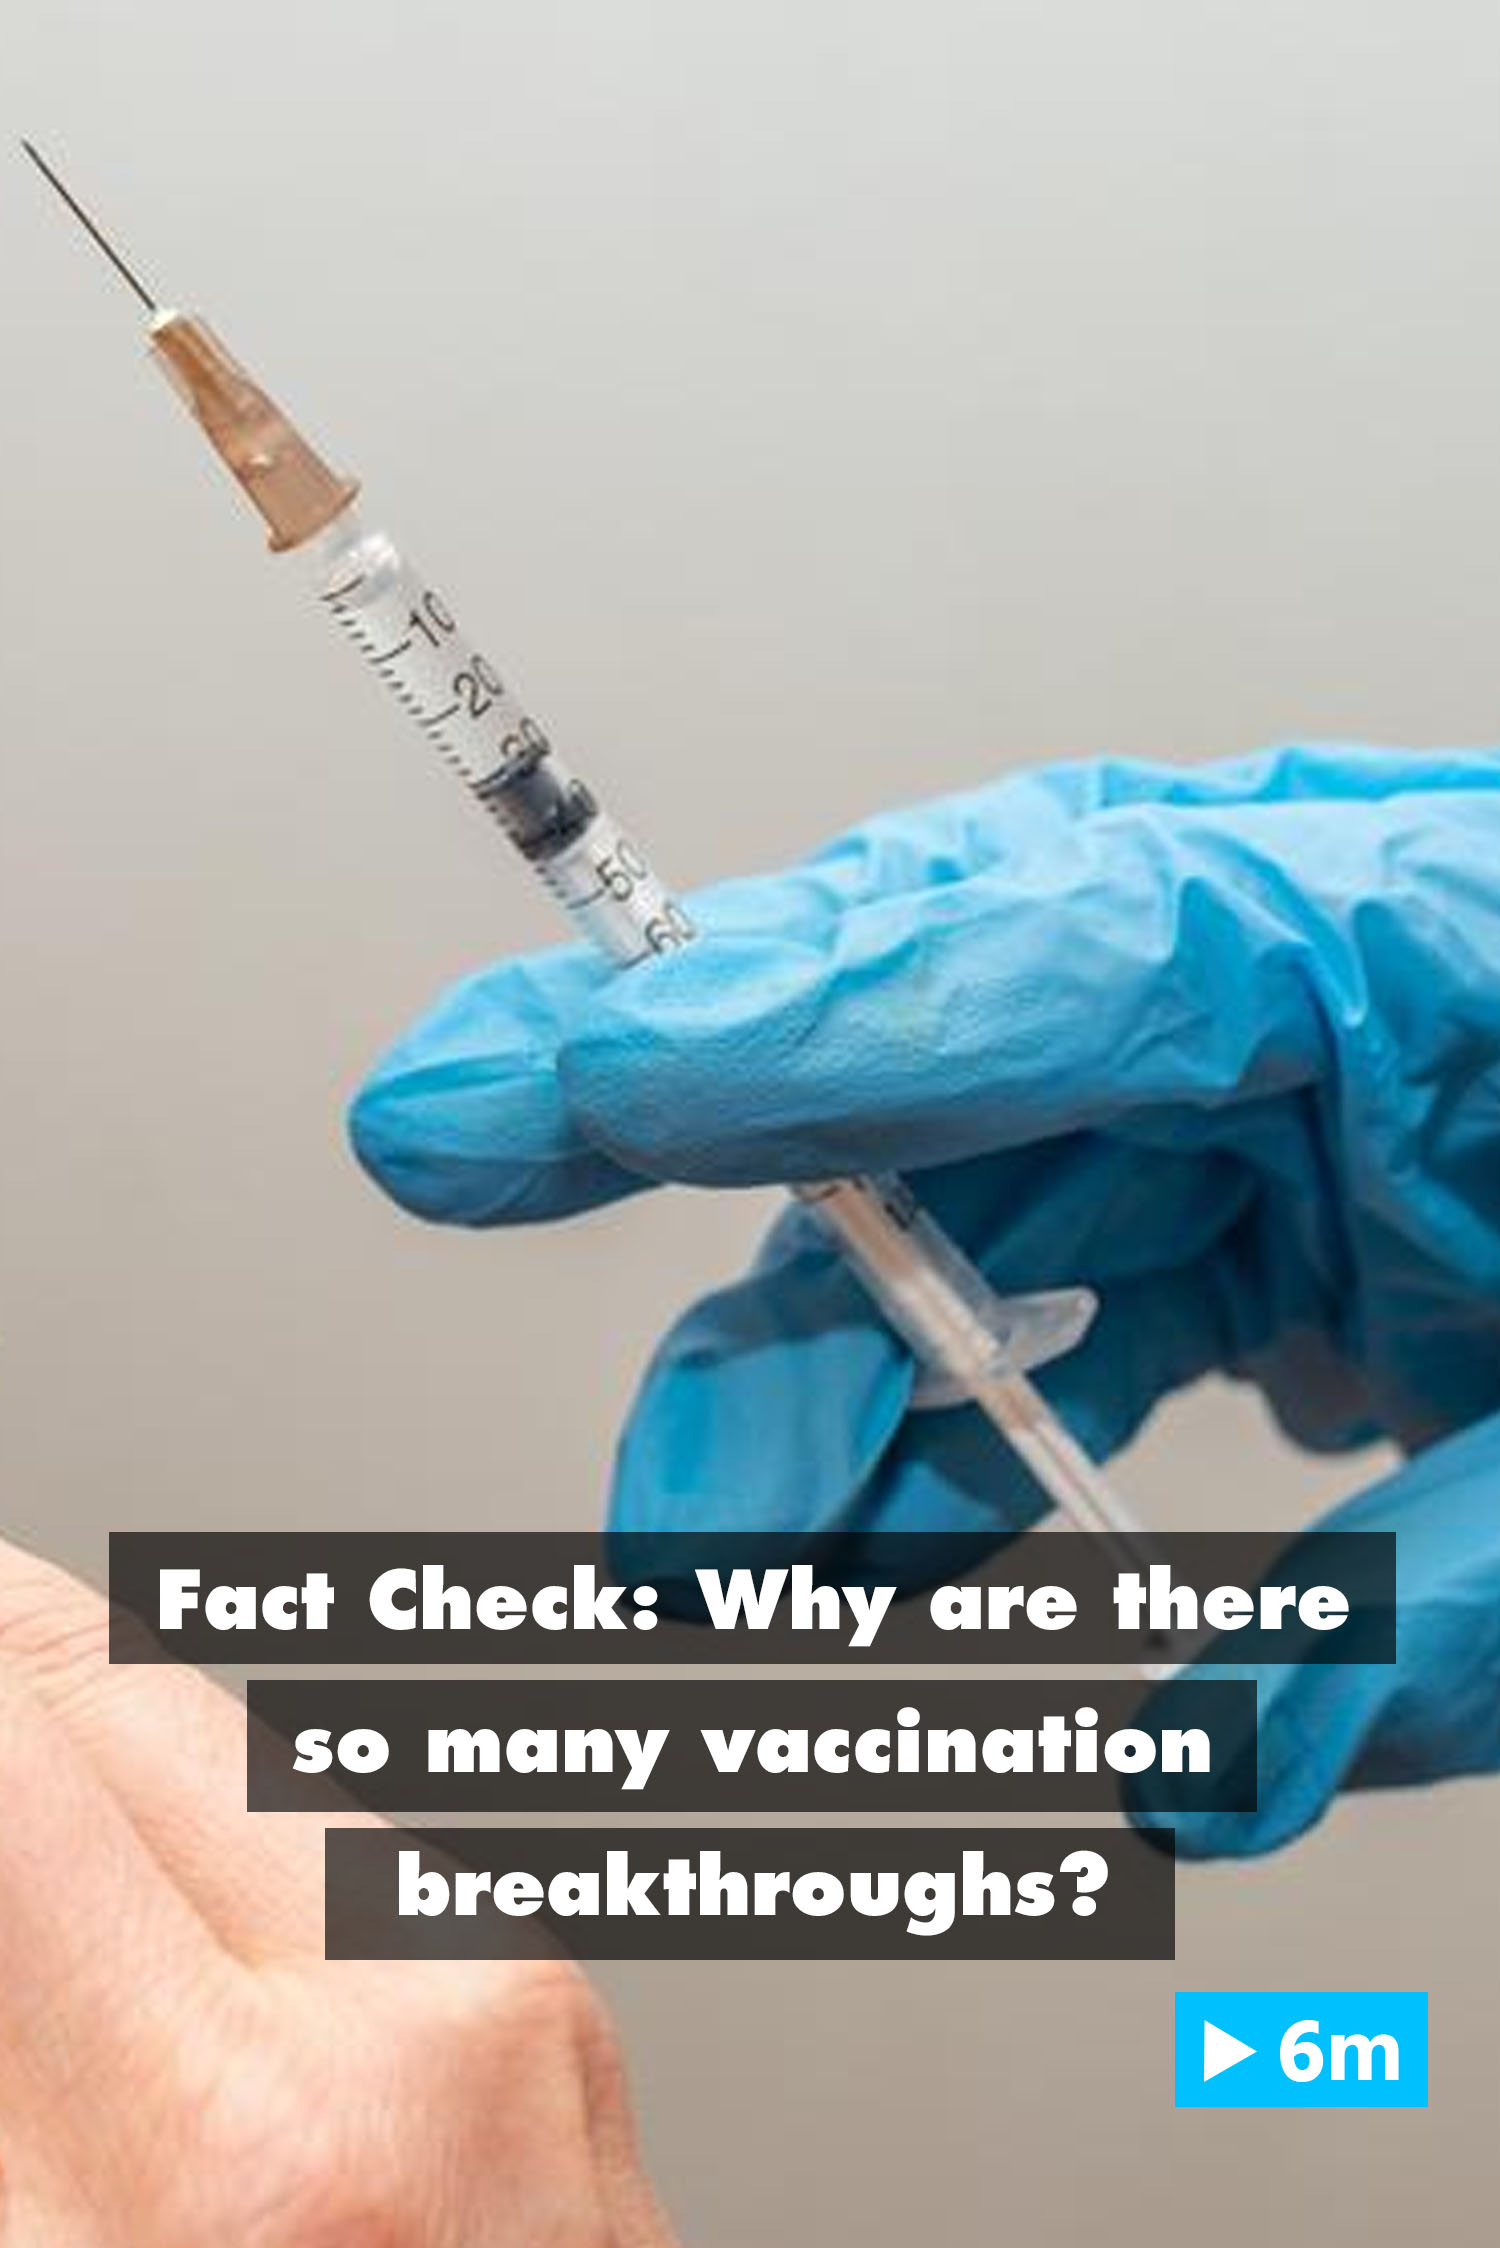 Fact check: Why are there so many vaccination breakthroughs?